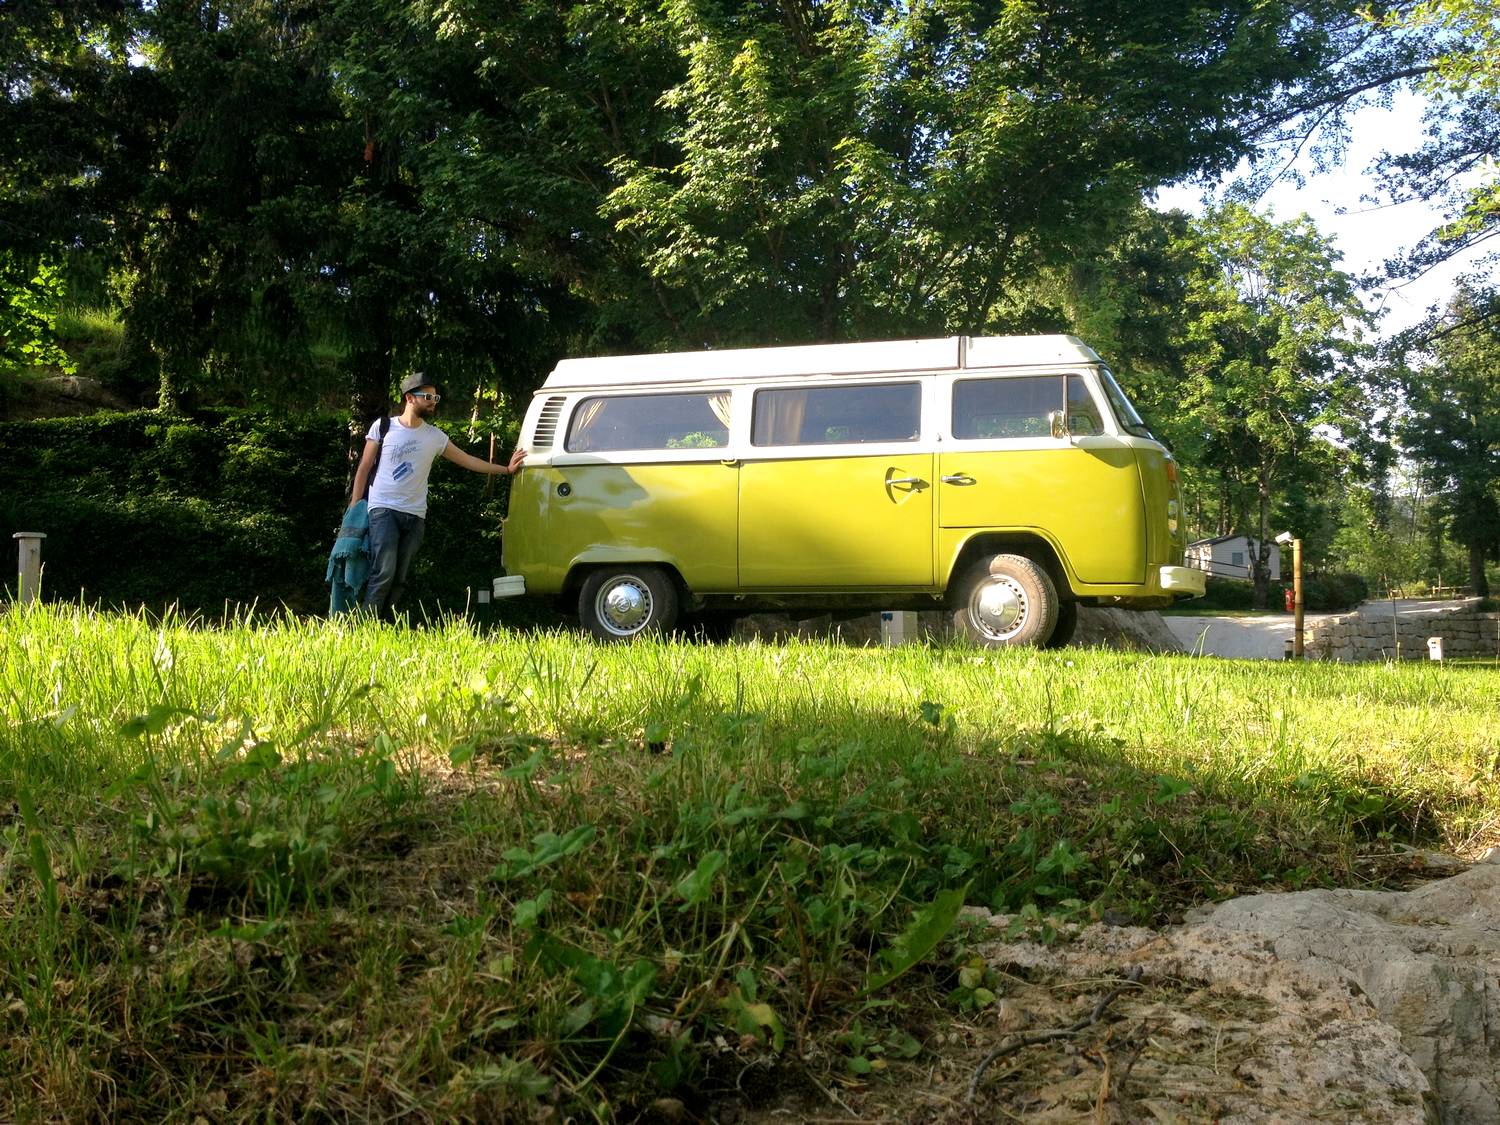 Seb and Scooby, the CevVan van - Salendrinque camping site, France